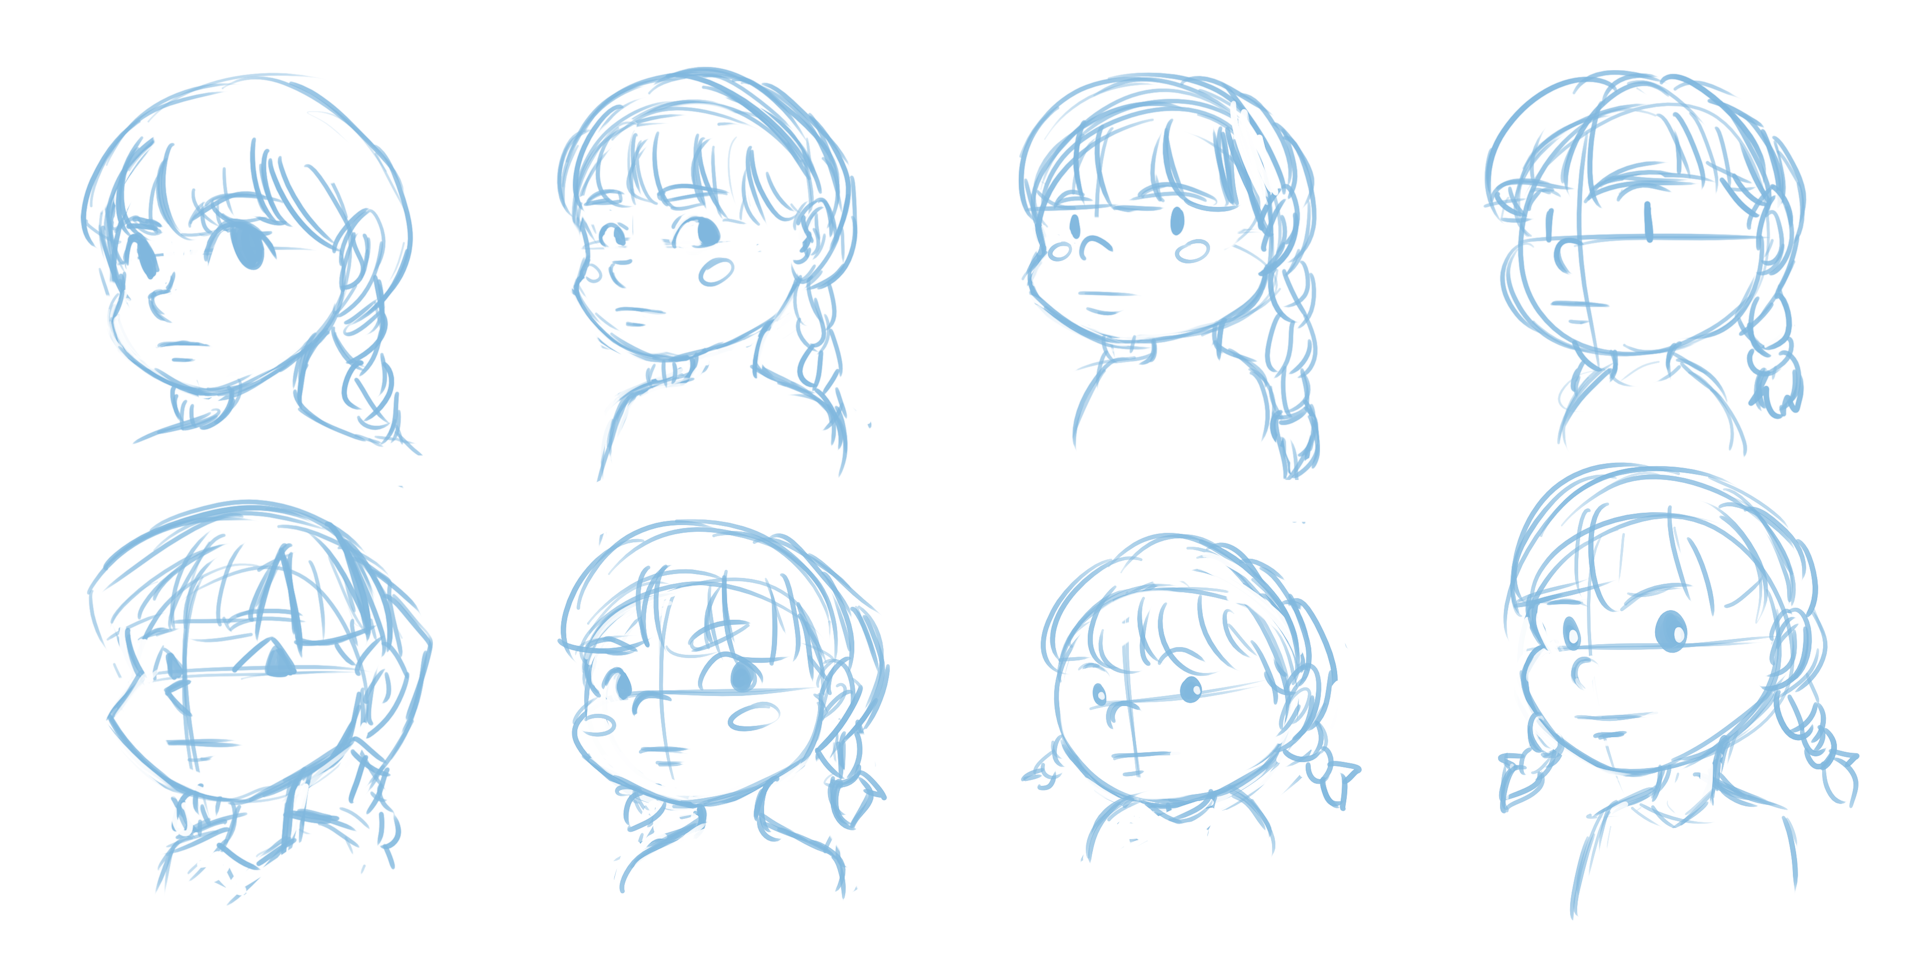 Initial brainstorming character sketches in a few different styles